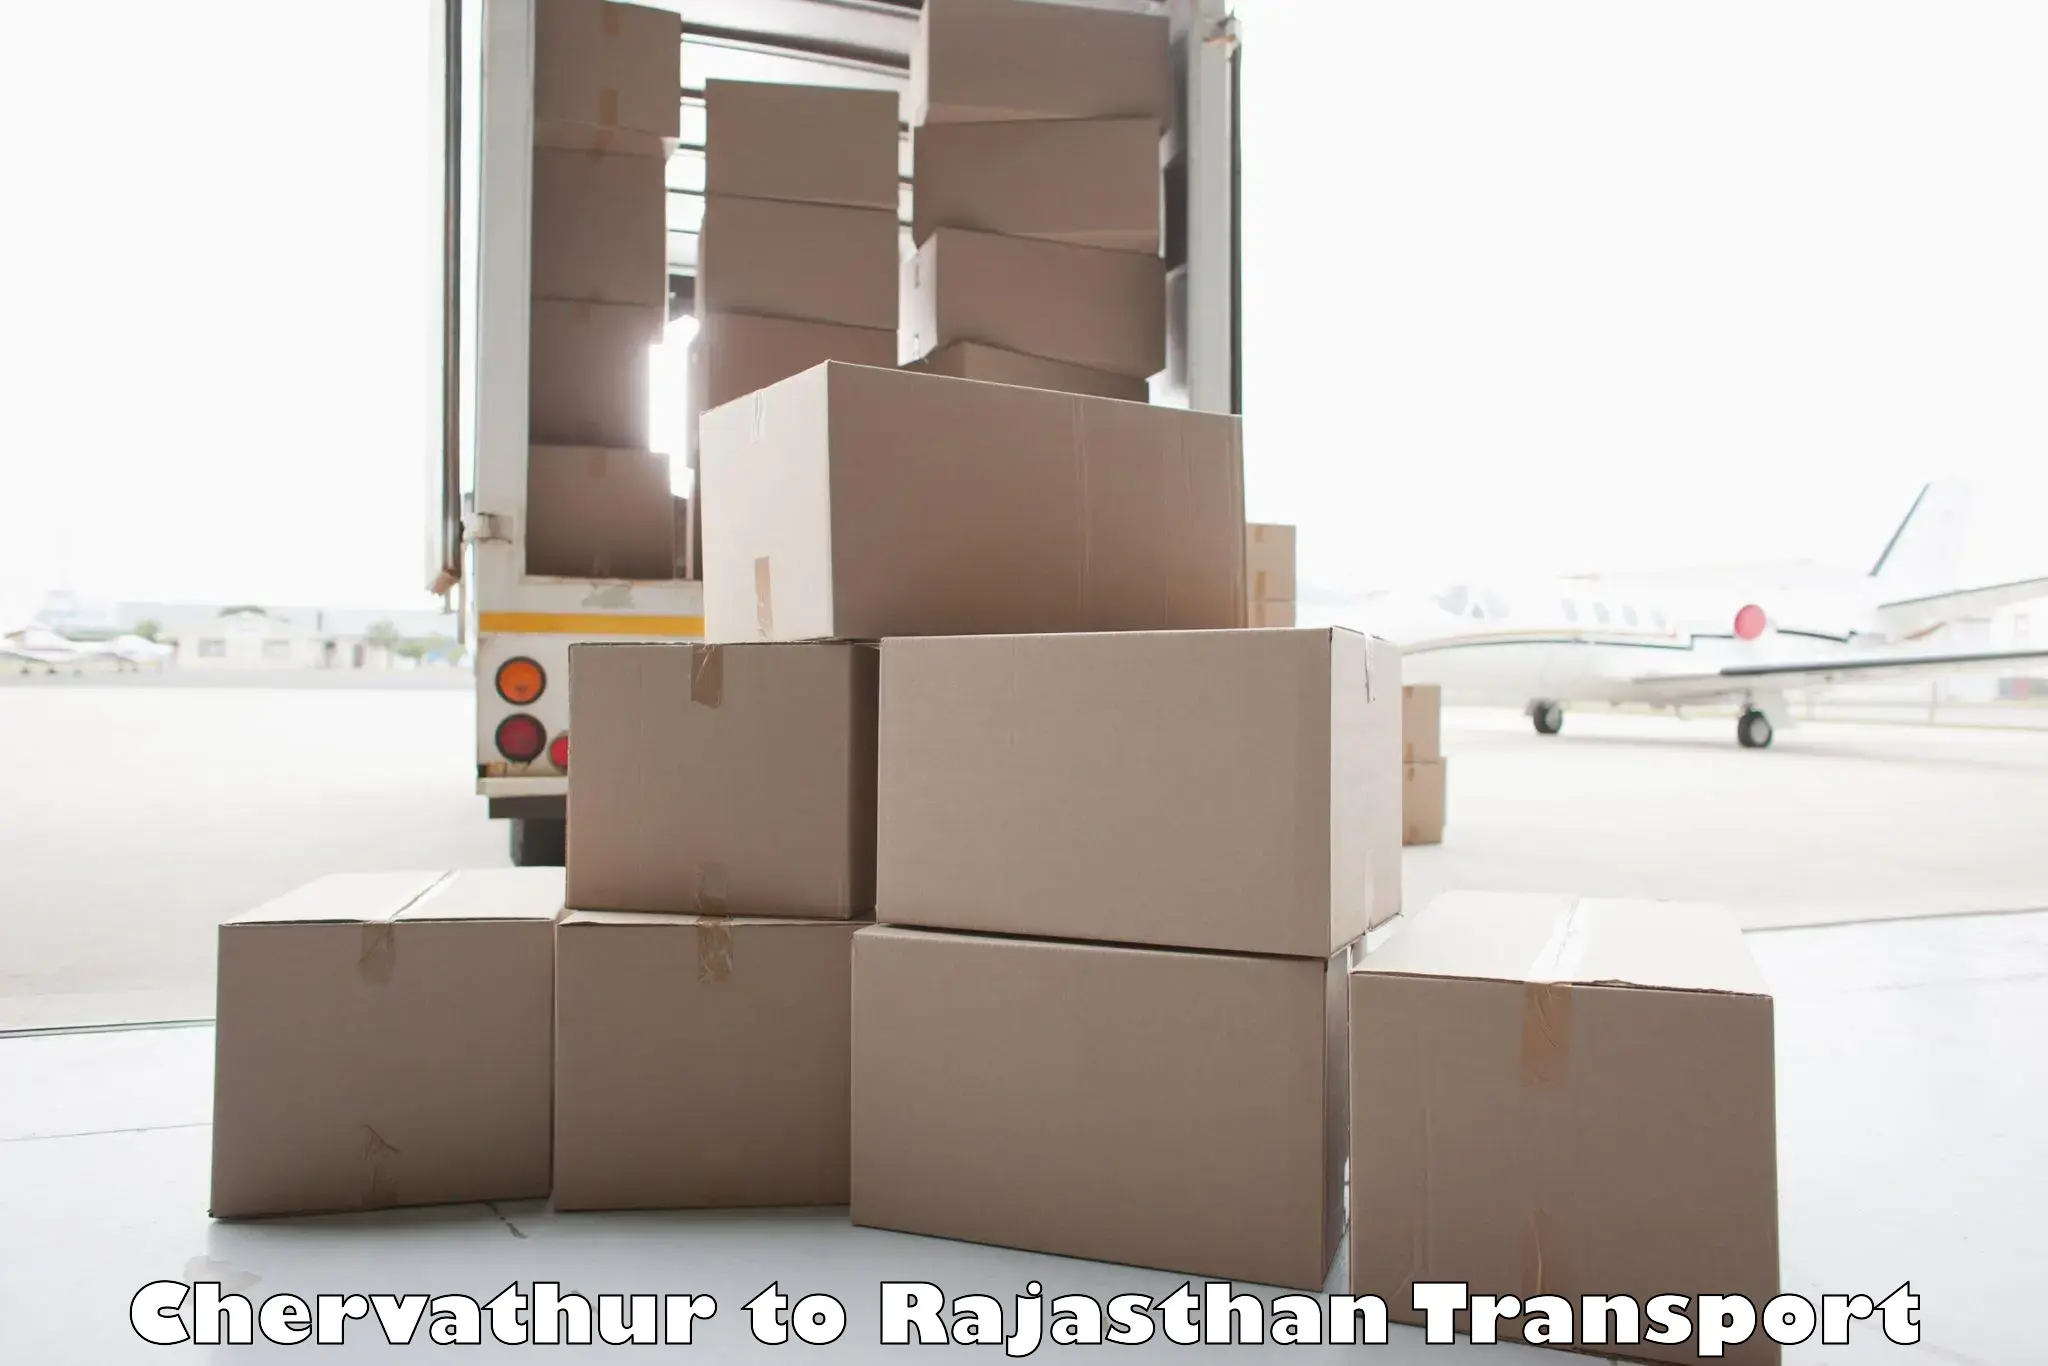 Truck transport companies in India Chervathur to Marwar